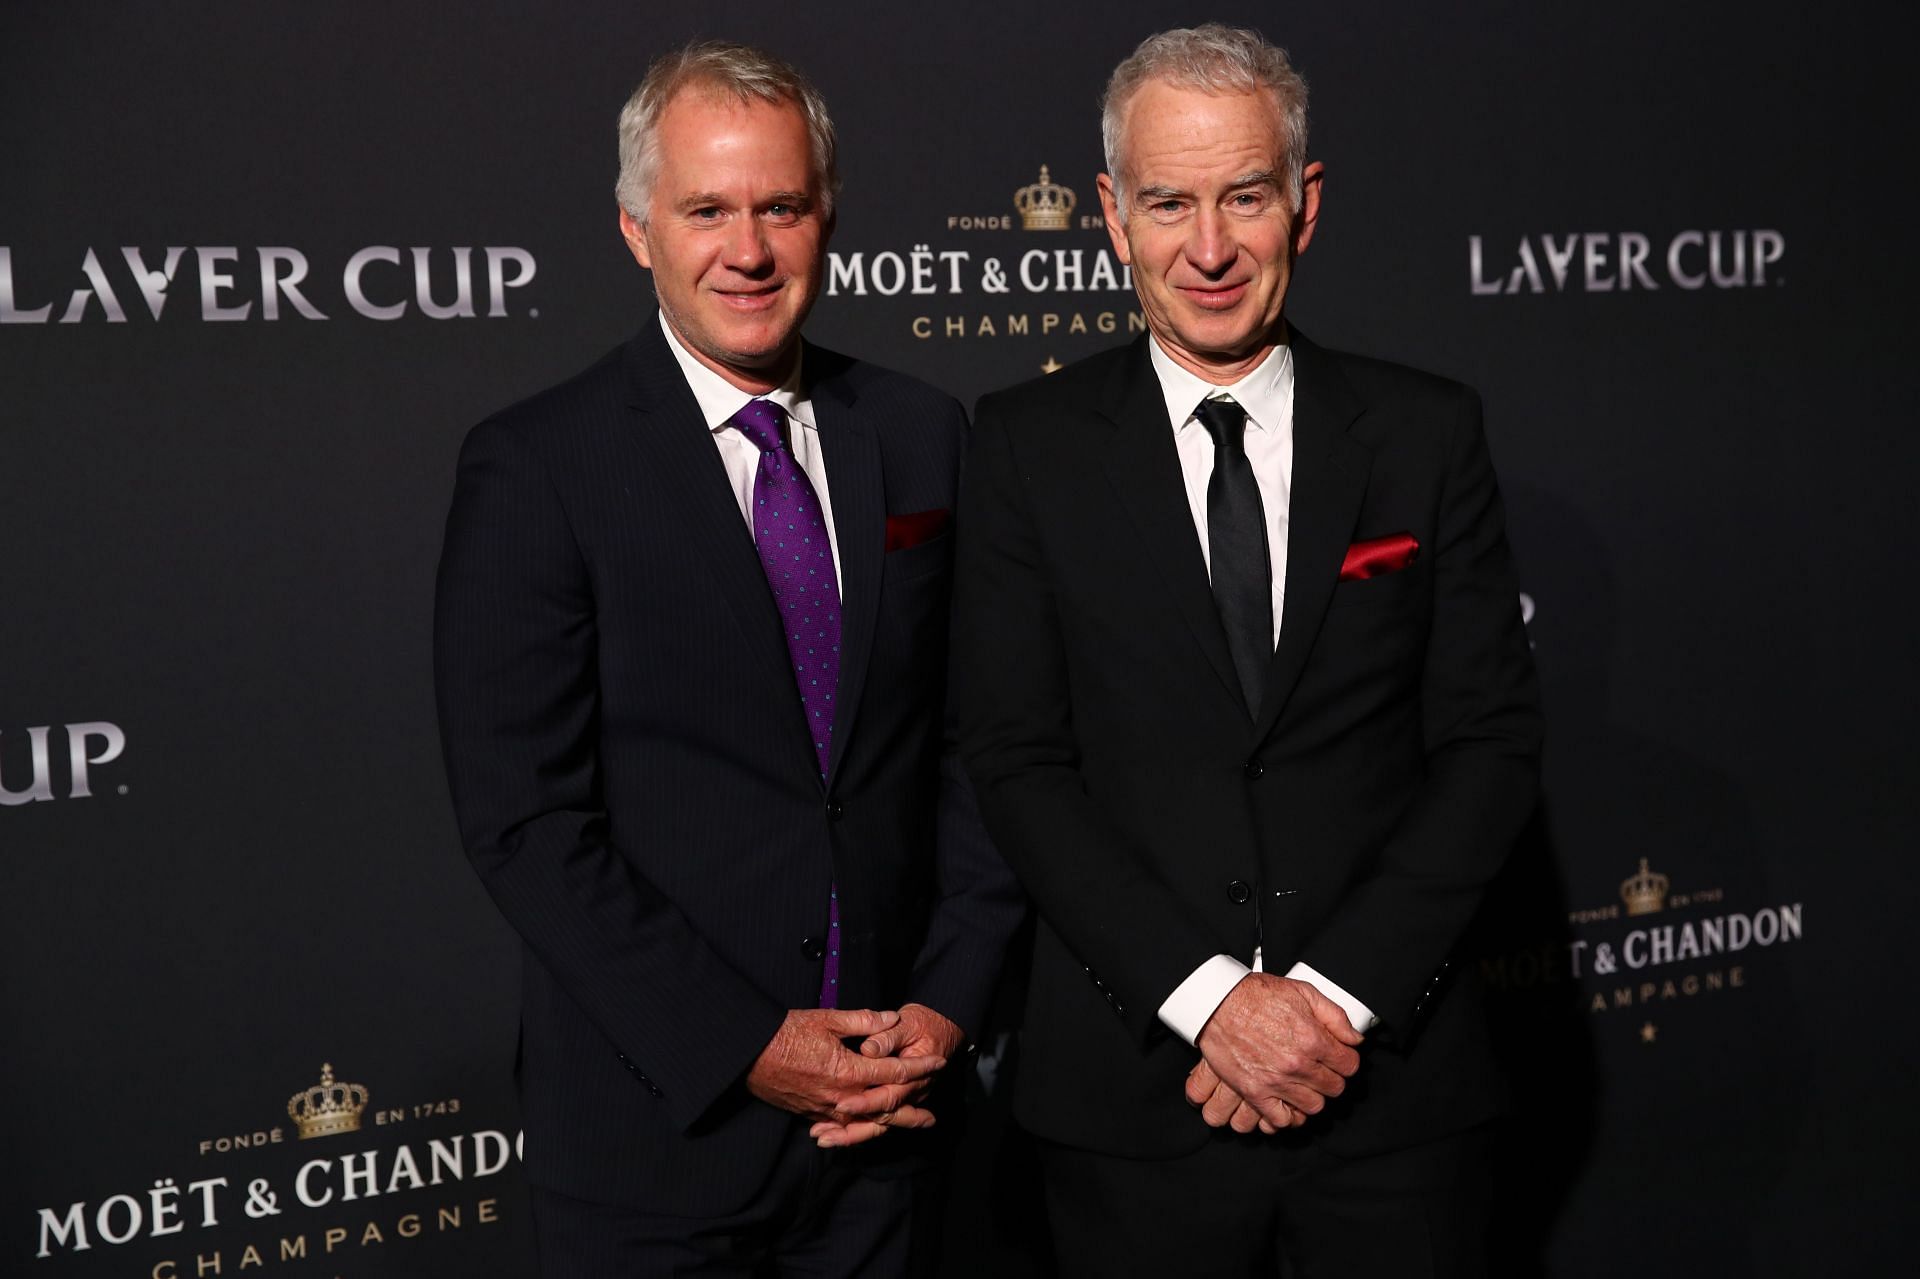 Patrick McEnroe (left) and John McEnroe at the Laver Cup 2019 - Preview Day 4